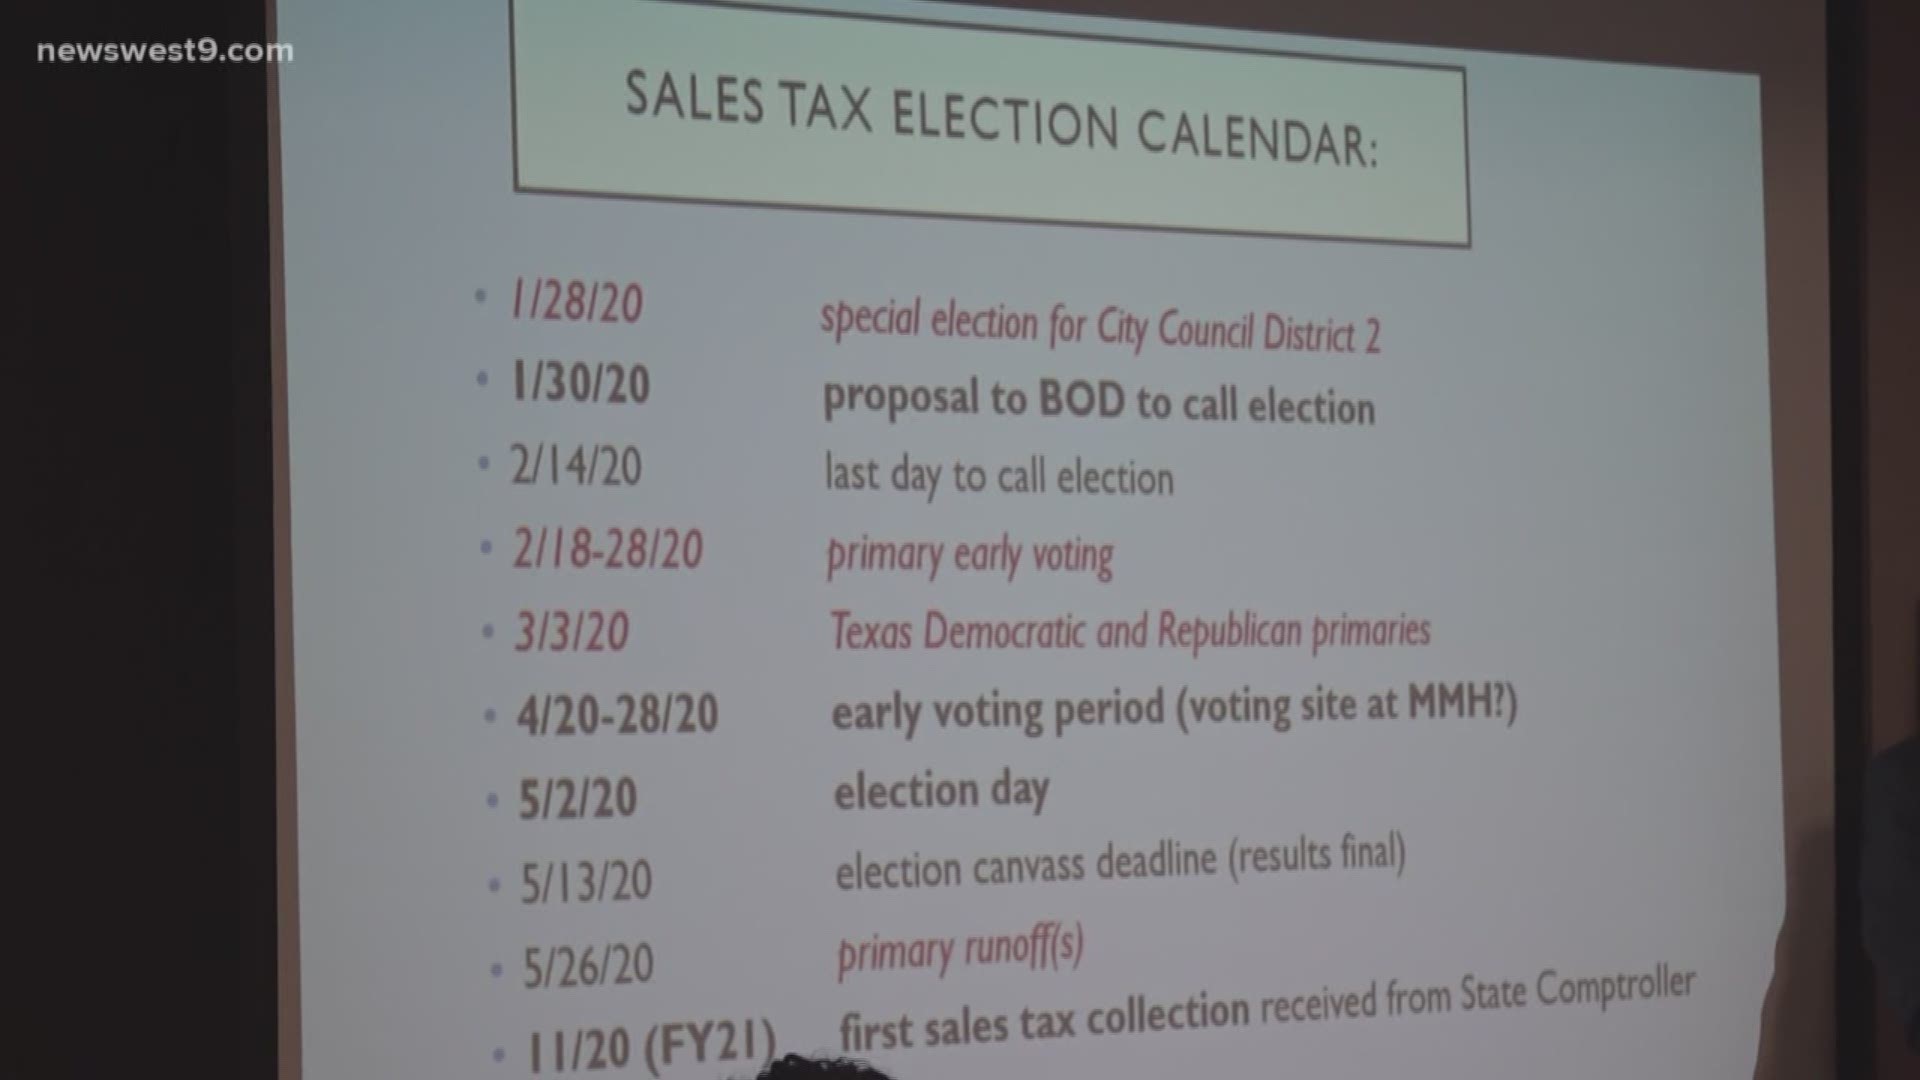 The MCHD has called for a May sales tax election to increase sales tax by .25%.